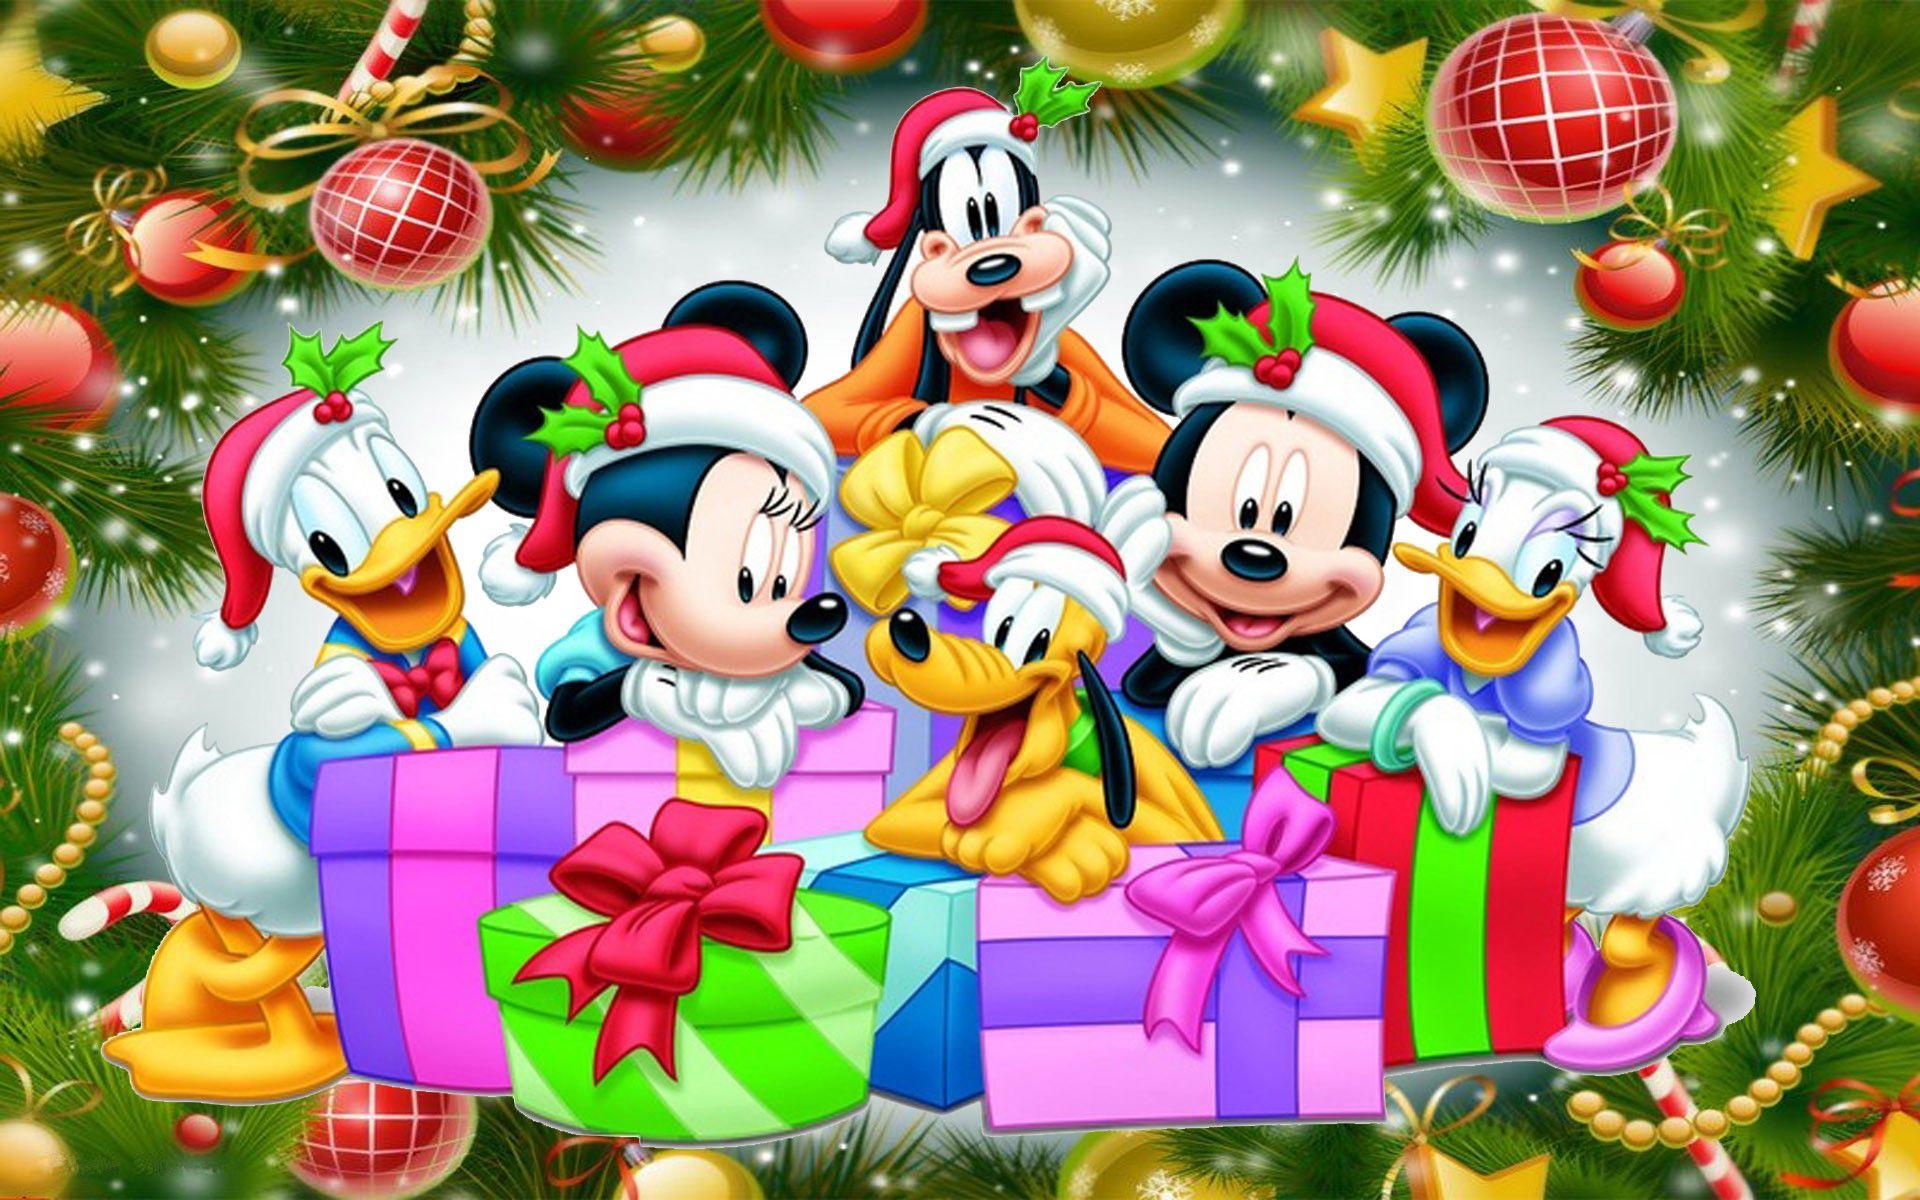 FREE Cartoon Graphics  Pics  Gifs  Photographs Mickey and Minnie Mouse  Christmas wallpaper and backgrounds